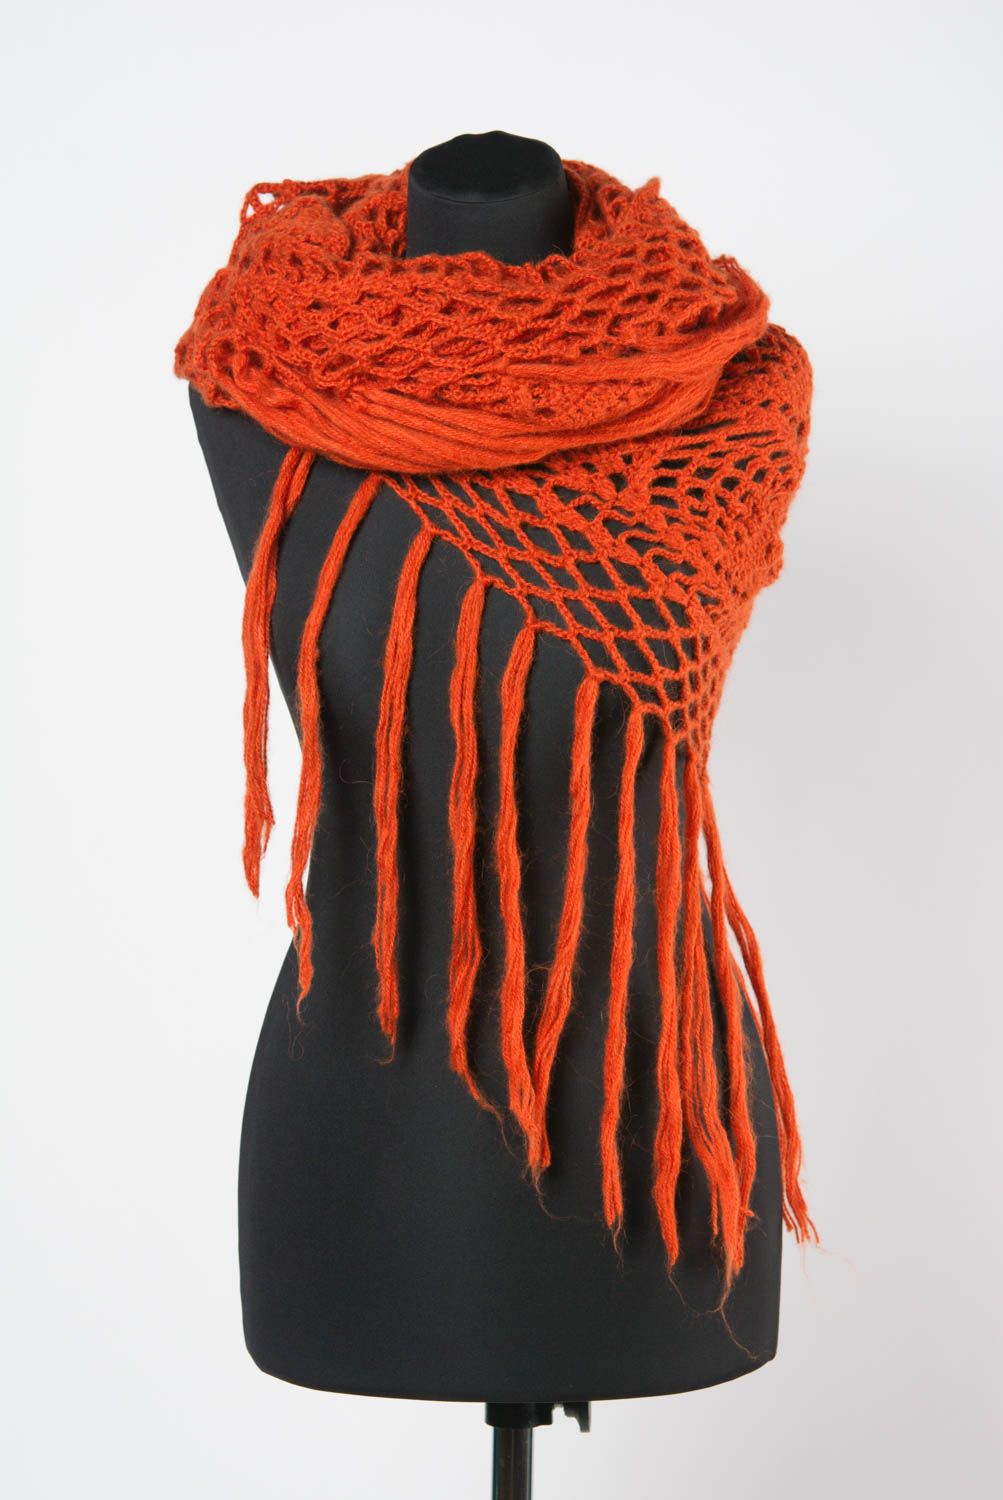 Handmade warm lace women's shawl knitted of wool of bright orange color photo 1